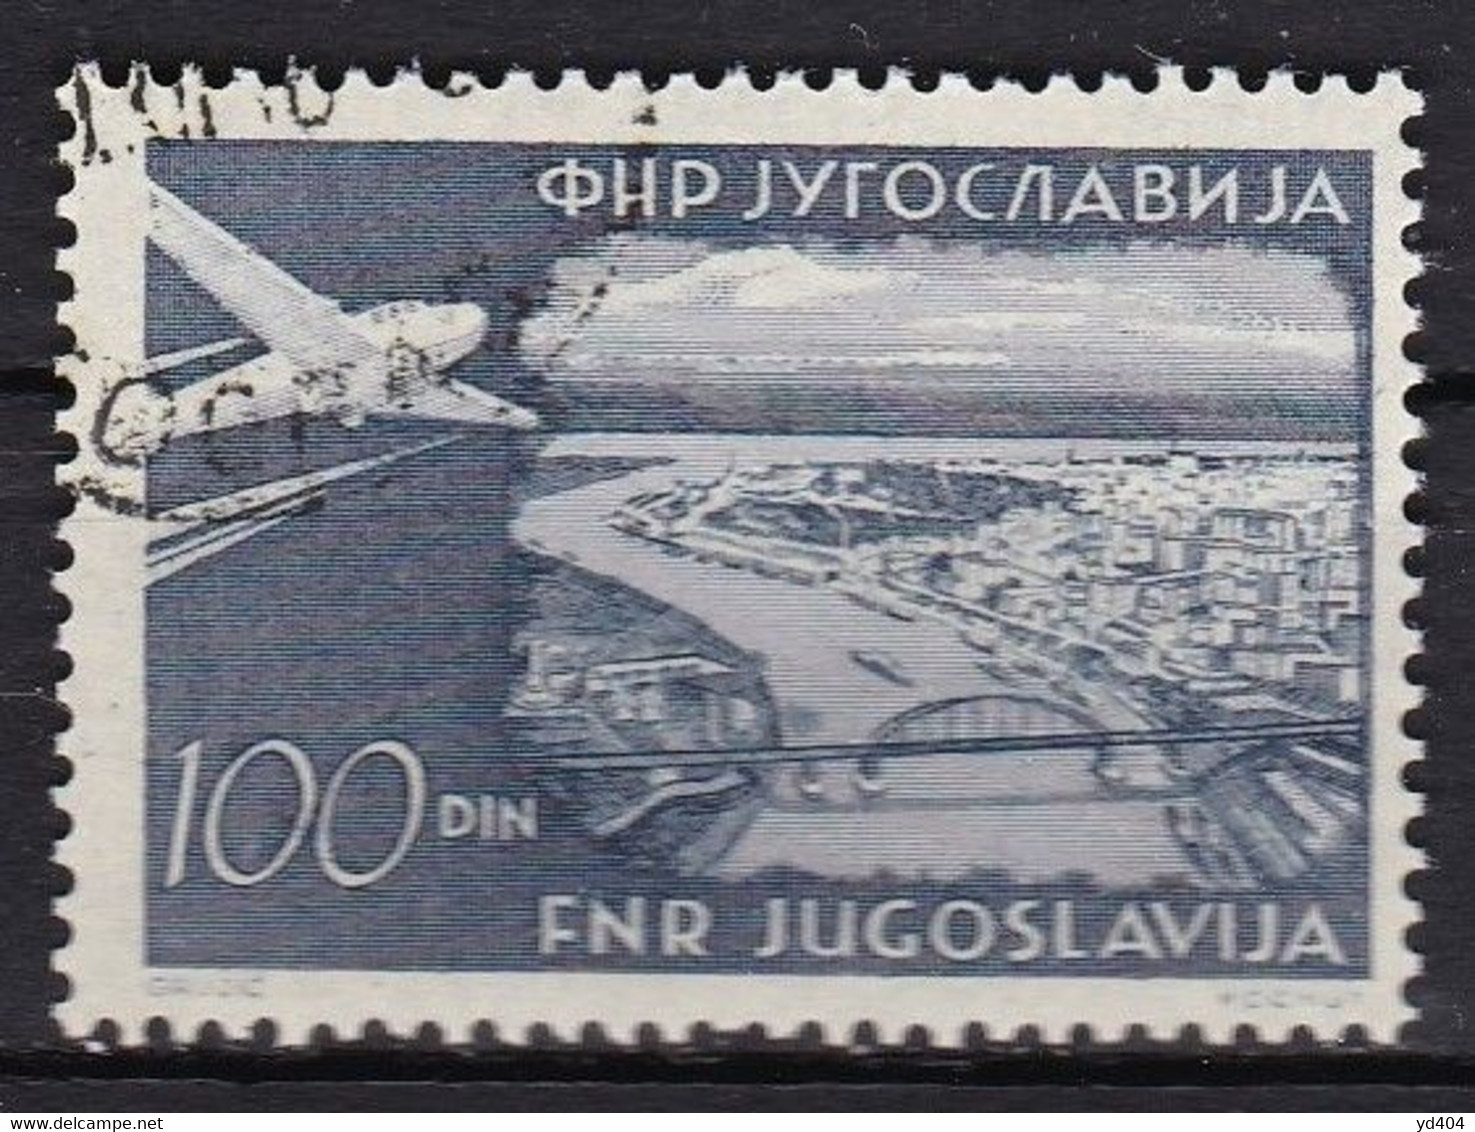 YU409 – YOUGOSLAVIA – AIRMAIL – 1951 – PLANE OVER BELGRADE – Y&T # 40 USED 22 € - Airmail